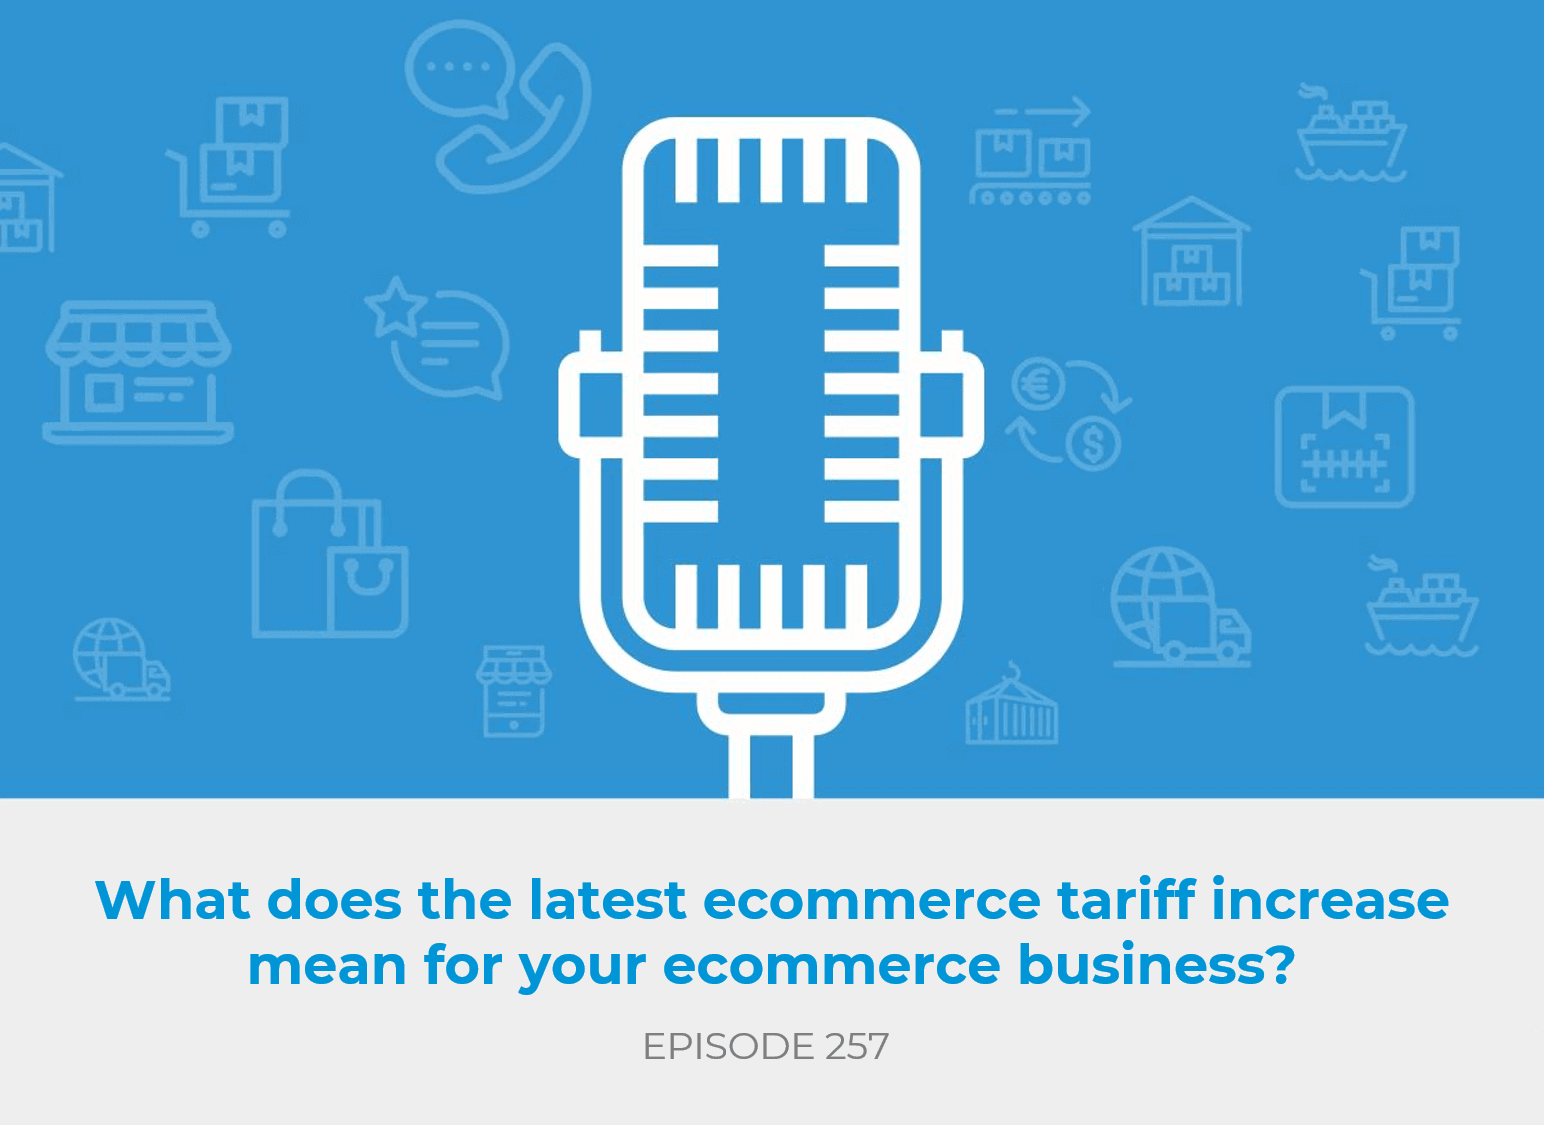 What does the latest tariff increase mean for your ecommerce business?